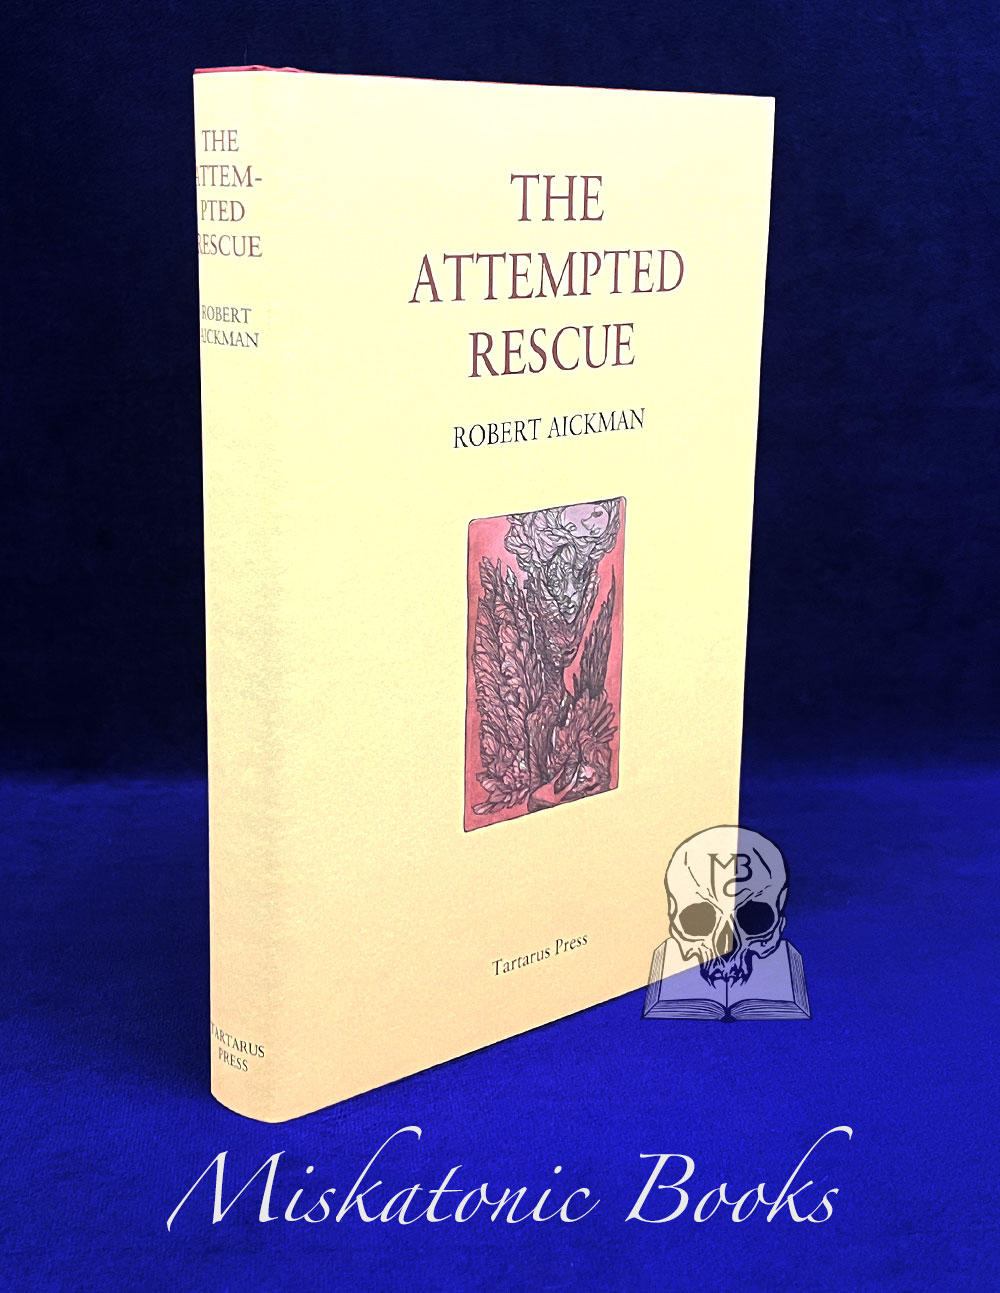 THE ATTEMPTED RESCUE: An autobiography by Robert Aickman with Introduction by Jeremy Dyson - Hardcover Edition limited to 350 Copies